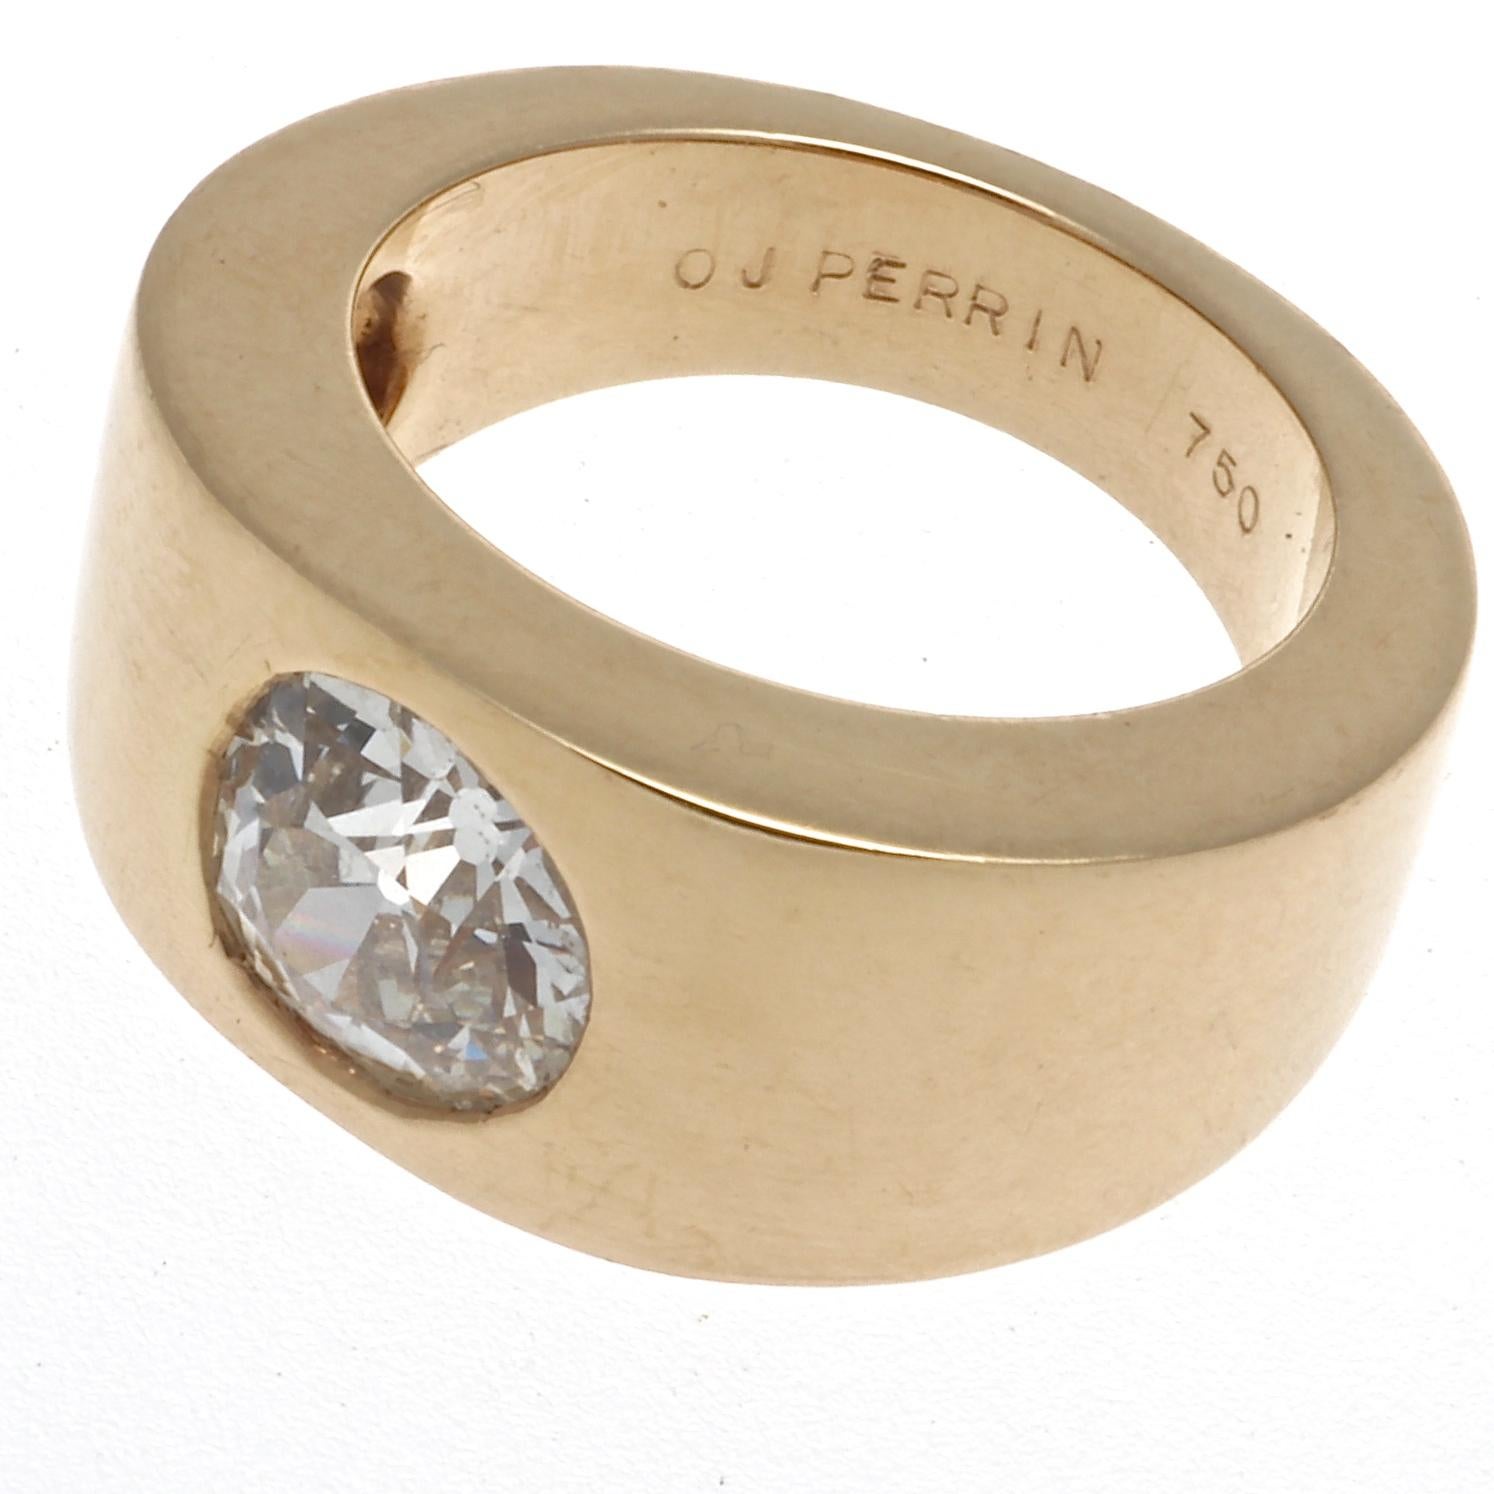 Exclusivity and creativity are key concepts of what empowers the establishment and attracts followers. OJ Perrin is such an establishment. Featuring a 1.51 carat old European cut diamond that is GIA certified as J color, SI2 clarity. Perfectly bezel